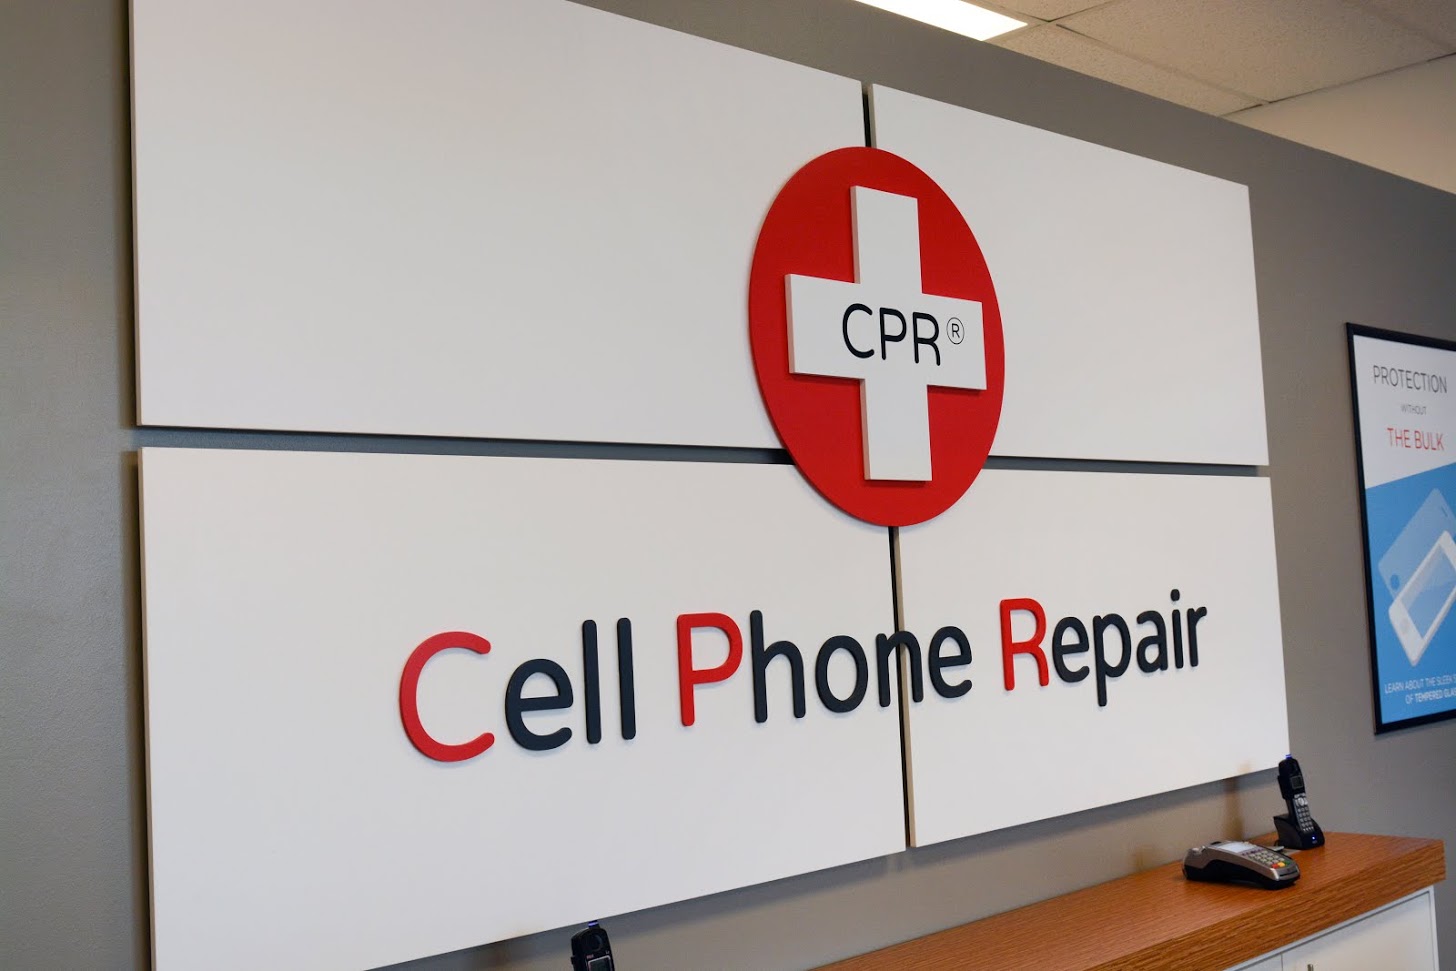 CPR Cell Phone Repair, Wednesday, September 18, 2019, Press release picture